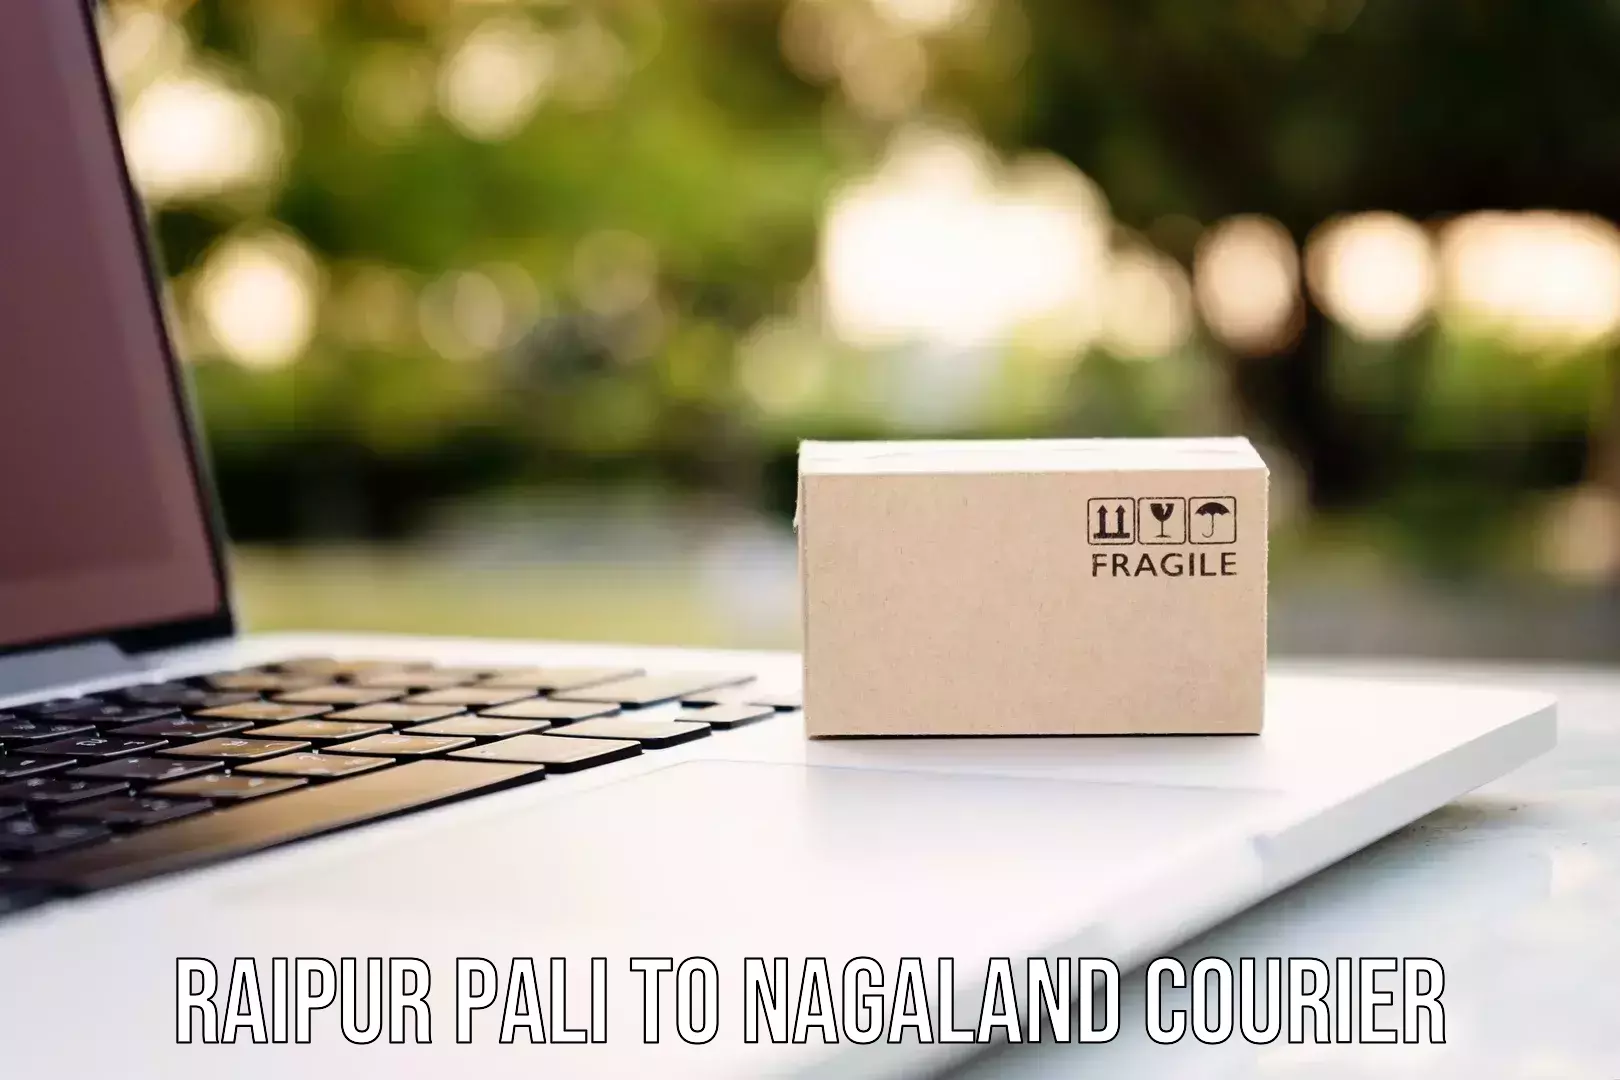 Personalized courier experiences Raipur Pali to Nagaland